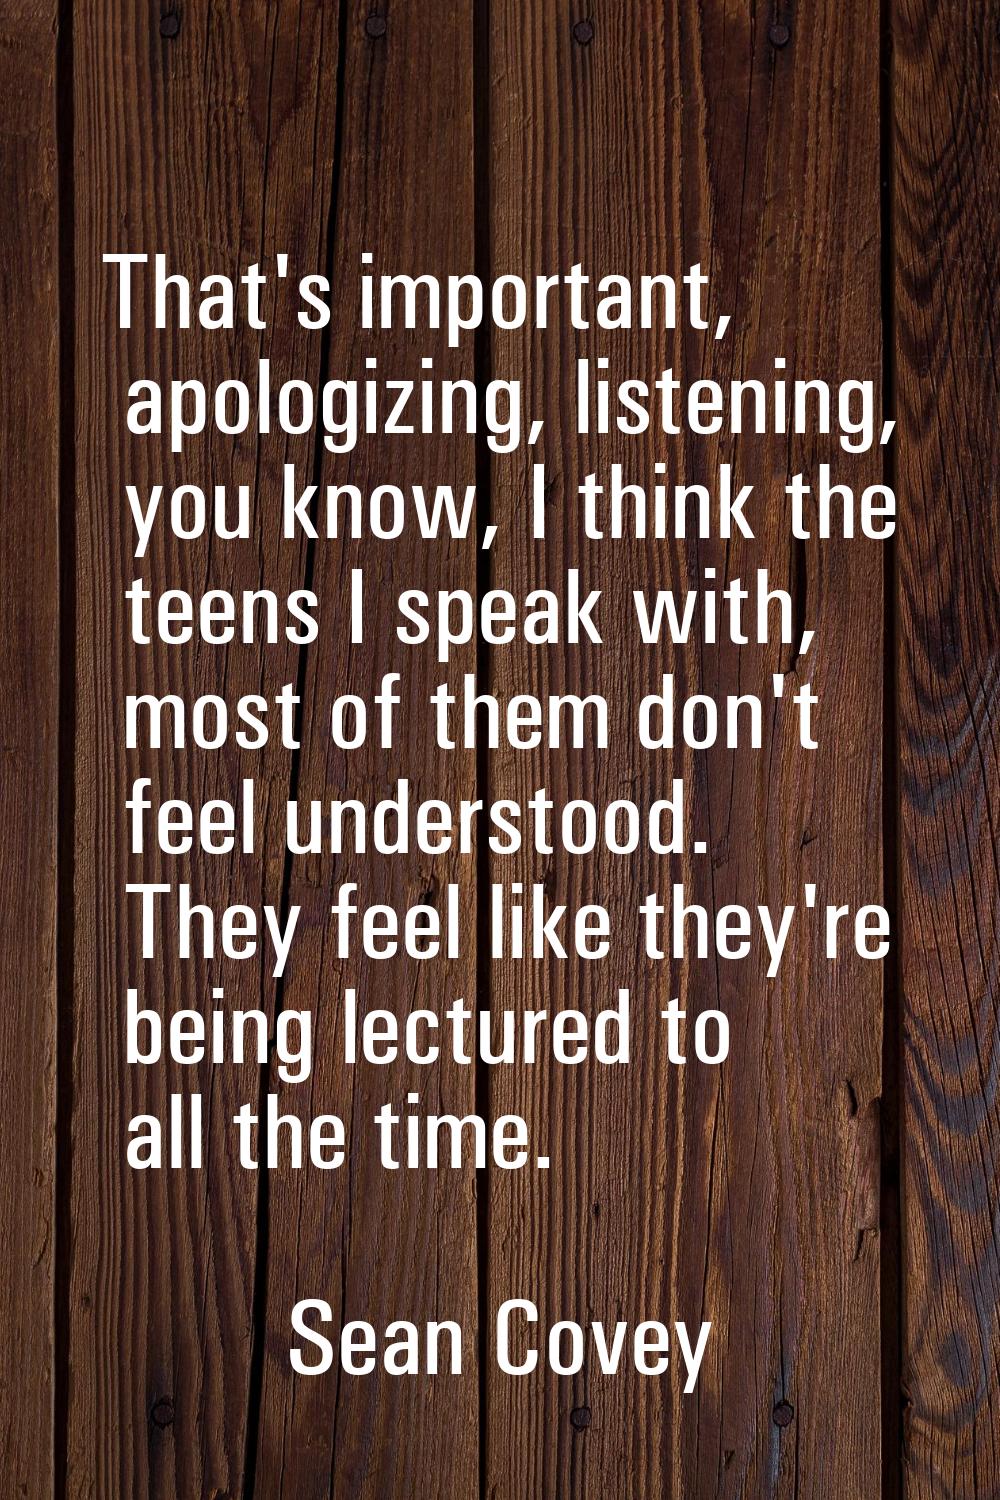 That's important, apologizing, listening, you know, I think the teens I speak with, most of them do